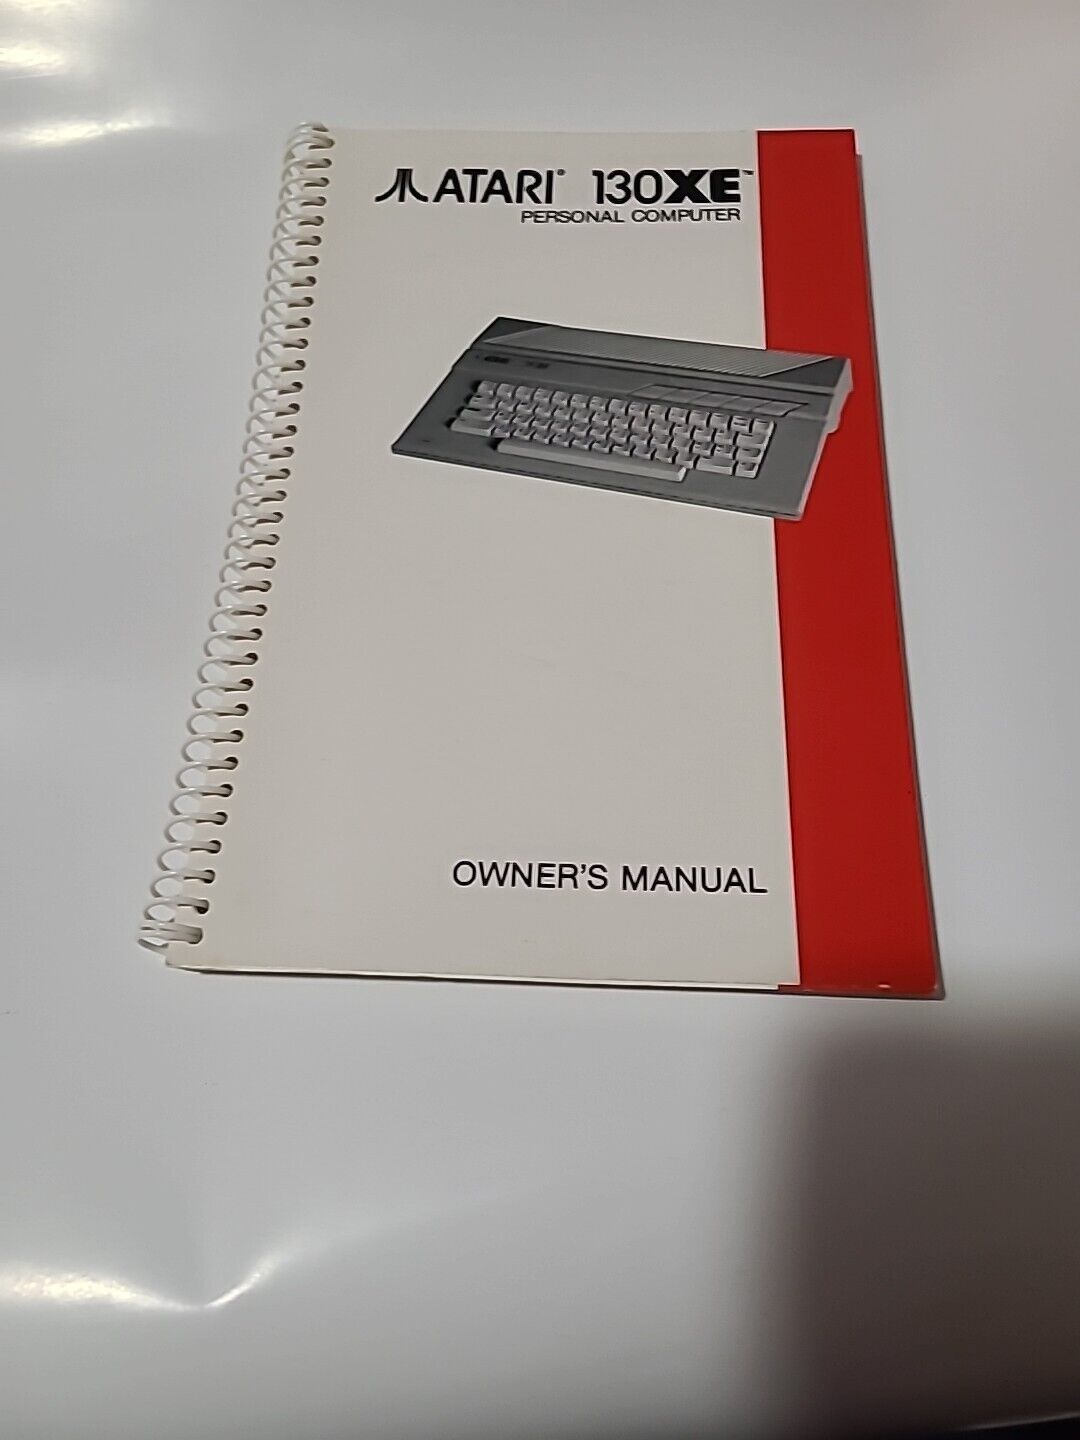 Atari 130XE Personal Computer Owner’s Manual Vintage 1985 Clean Exc